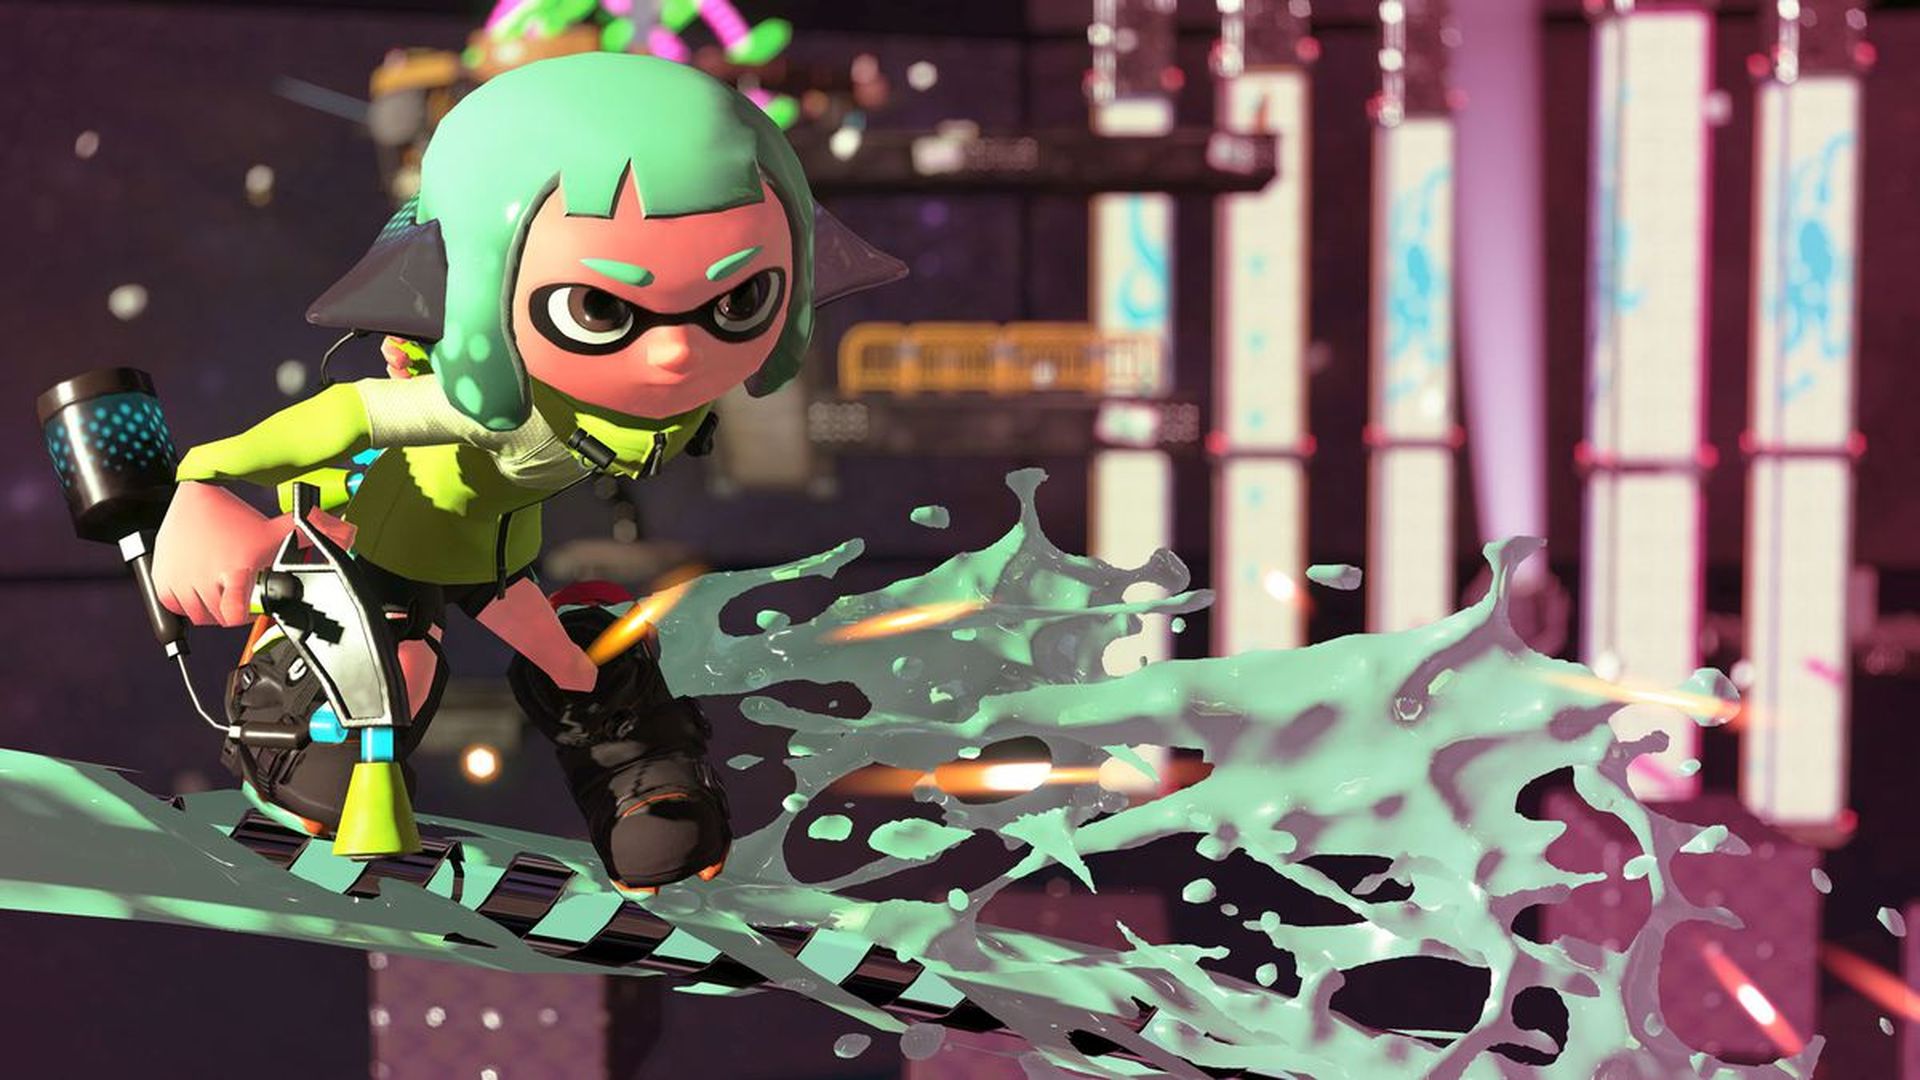 How to draw in Splatoon 2?